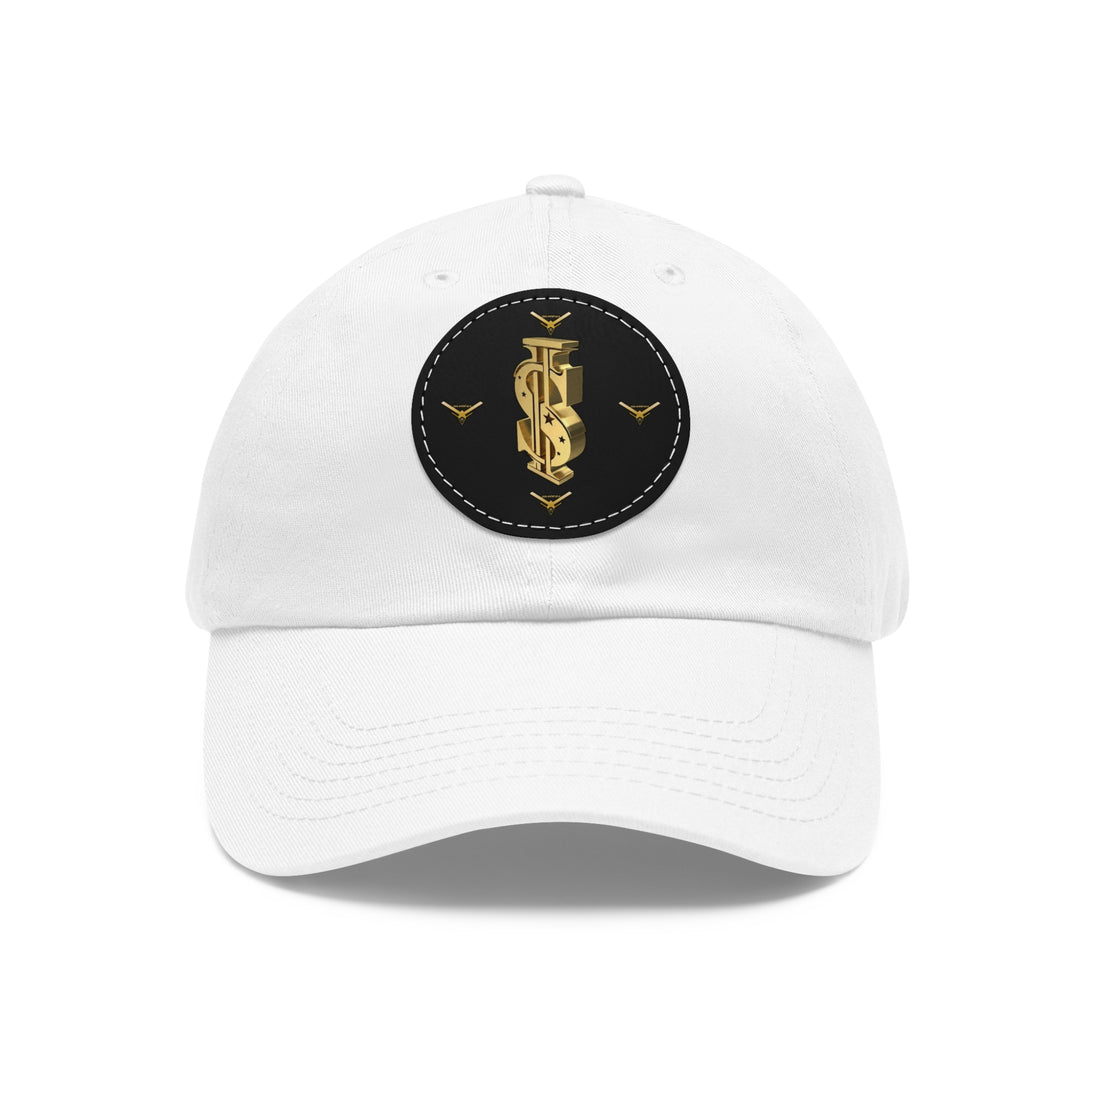 Limited $ sign by&amp;andyfxea hat (Round)